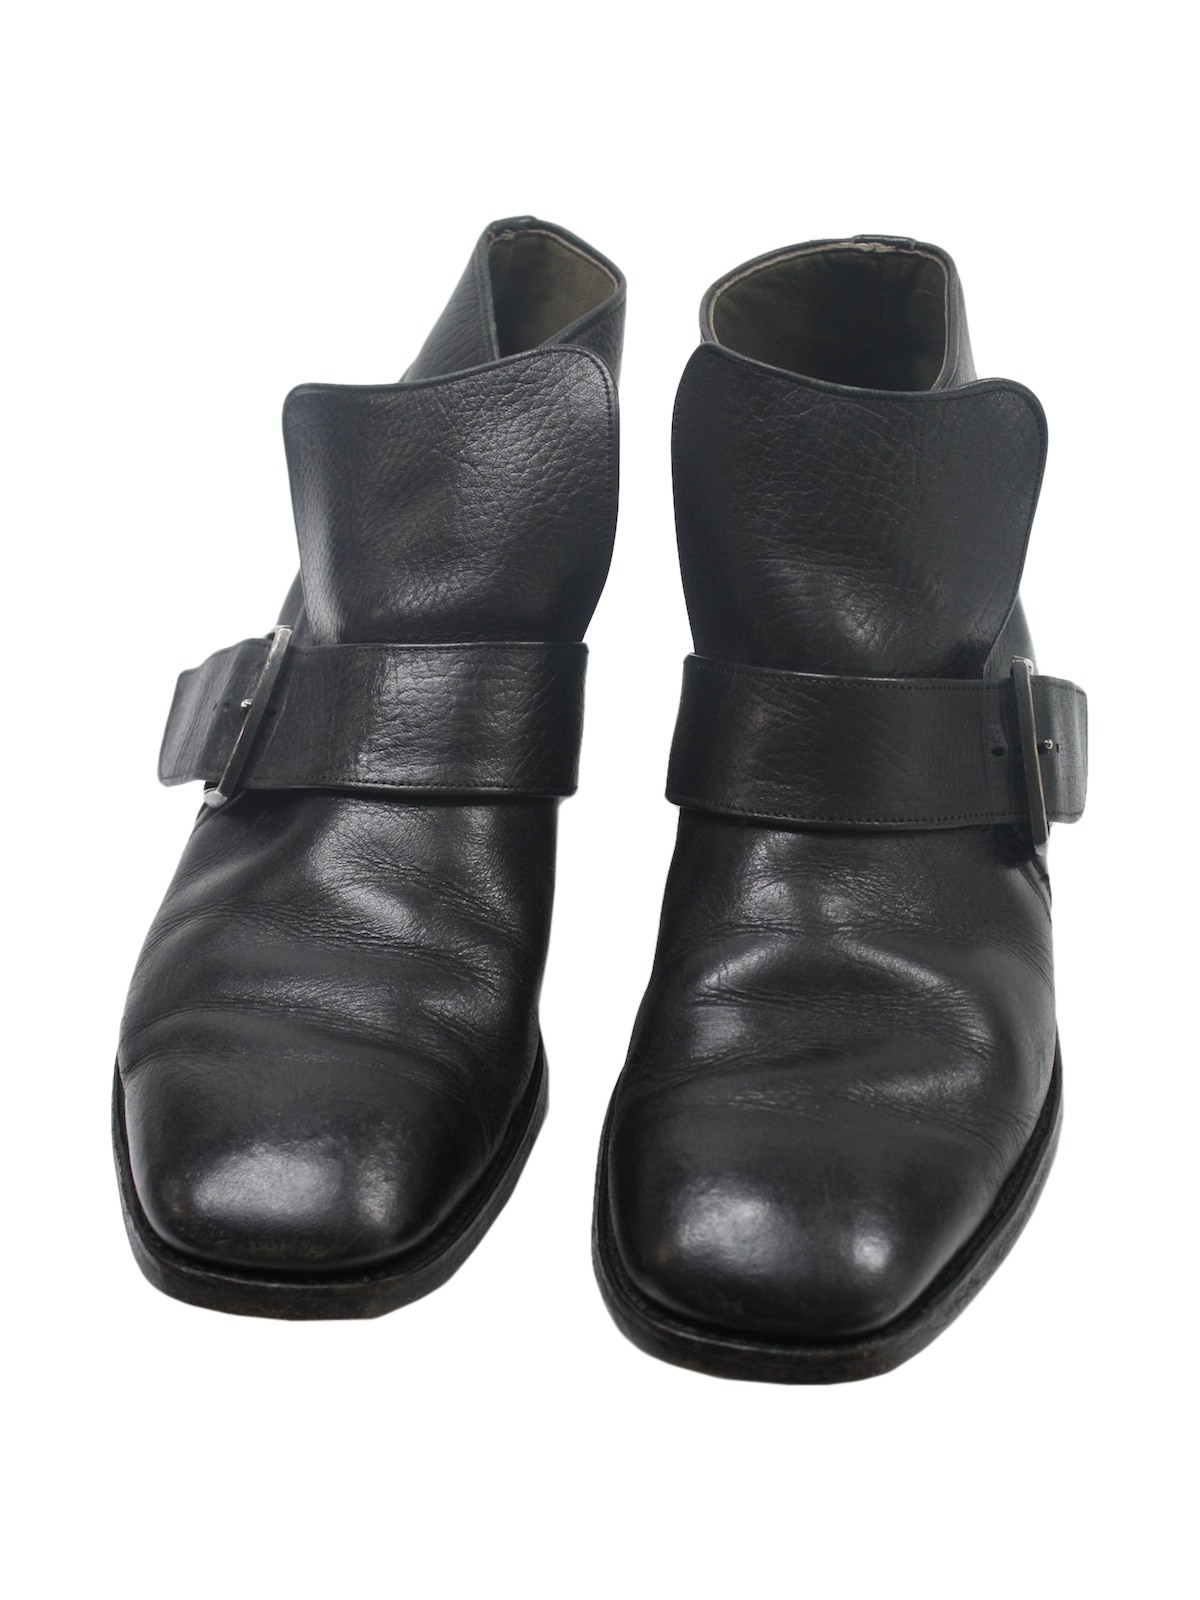 Retro 1970's Shoes: 70s -No Label- Mens black smooth leather ankle ...